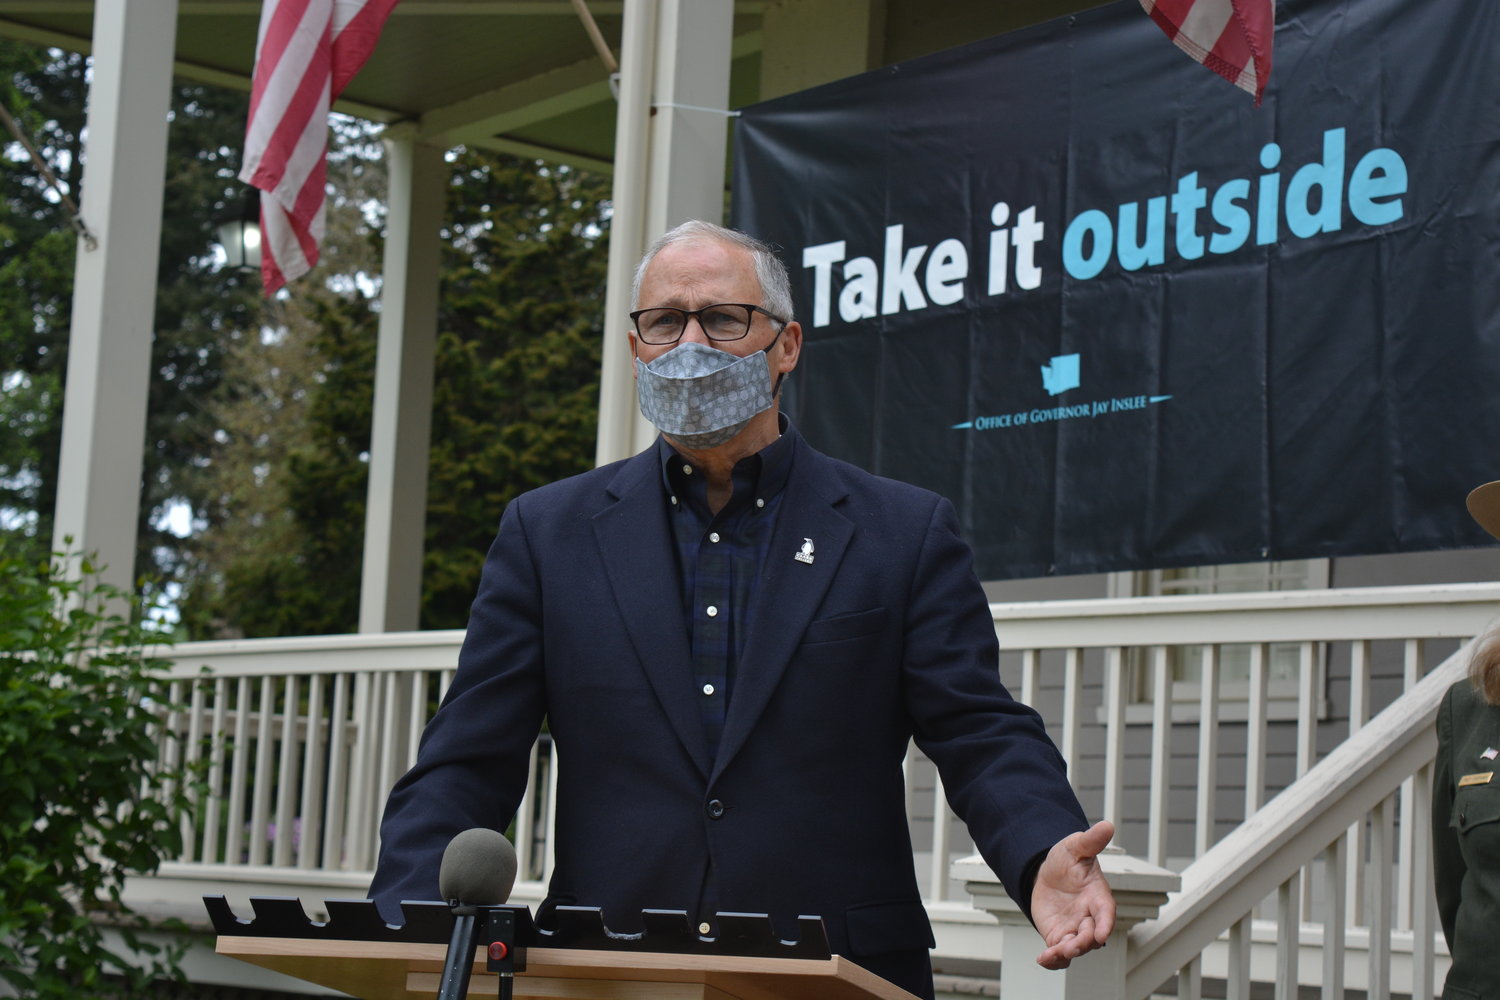 Gov. Jay Inslee visited the Fort Vancouver National Historic Site on Friday to promote “Take It Outside,” his state-wide campaign encouraging residents to get outdoors.